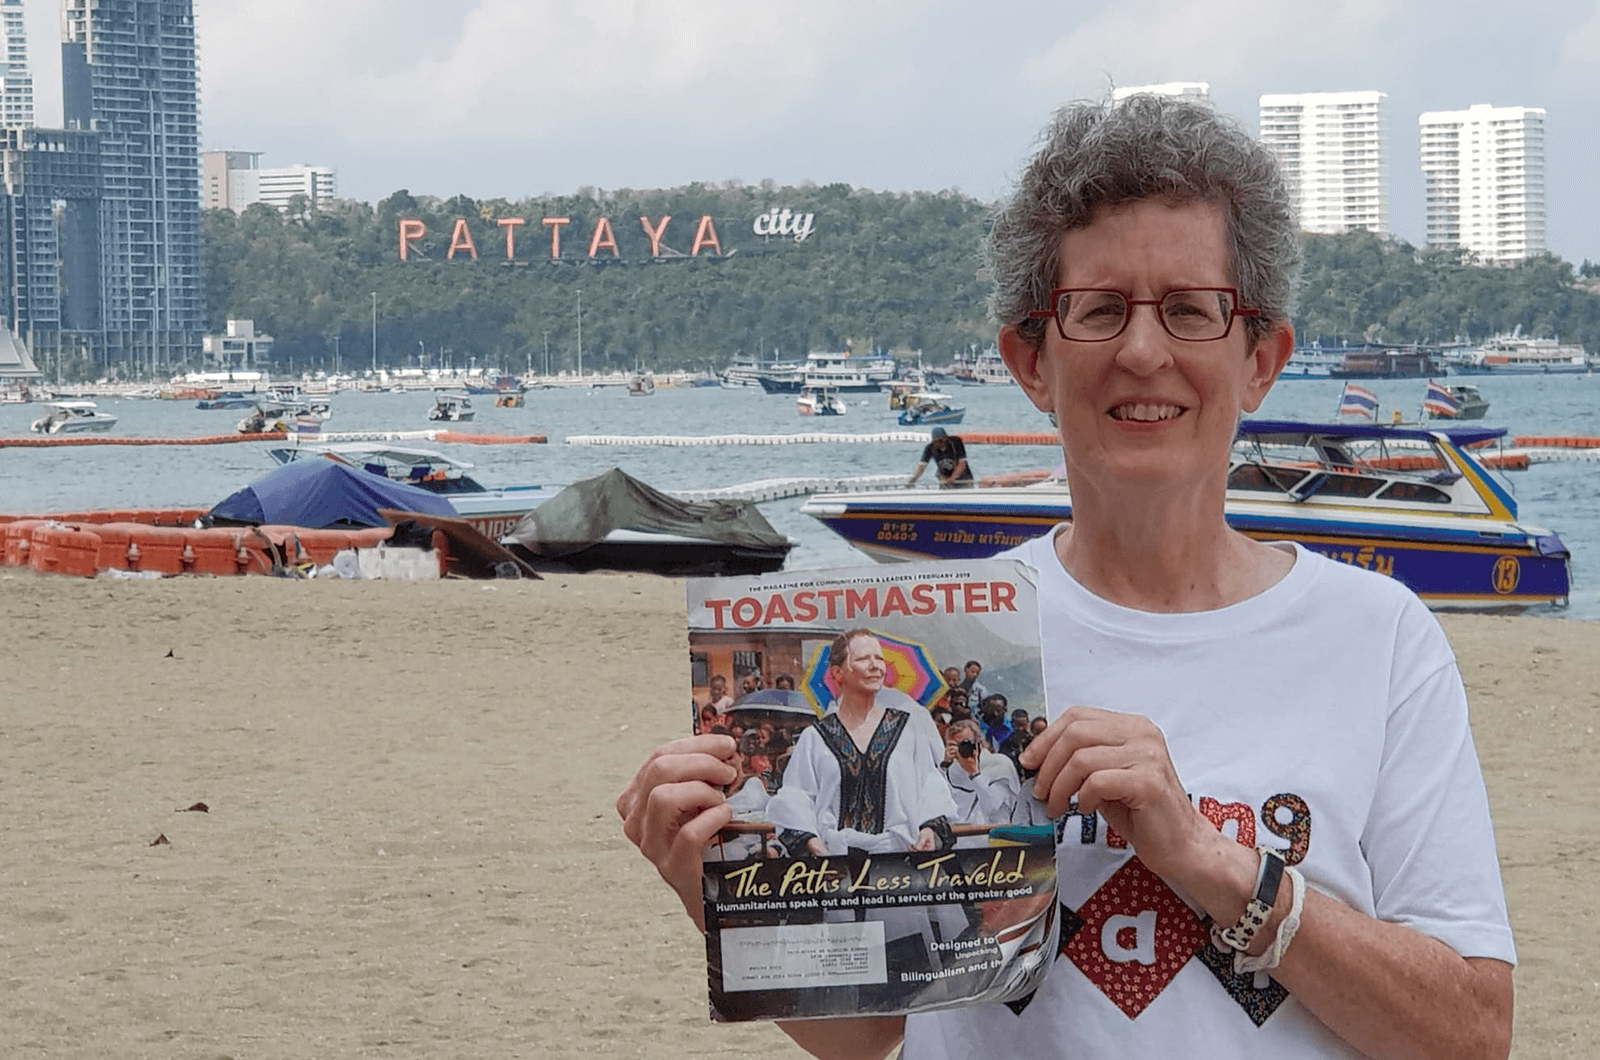 Susan Aviram of Shaker Heights, Ohio, visits Pattaya City, Thailand. She took this trip to see an exchange student who lived with her 20 years ago. 